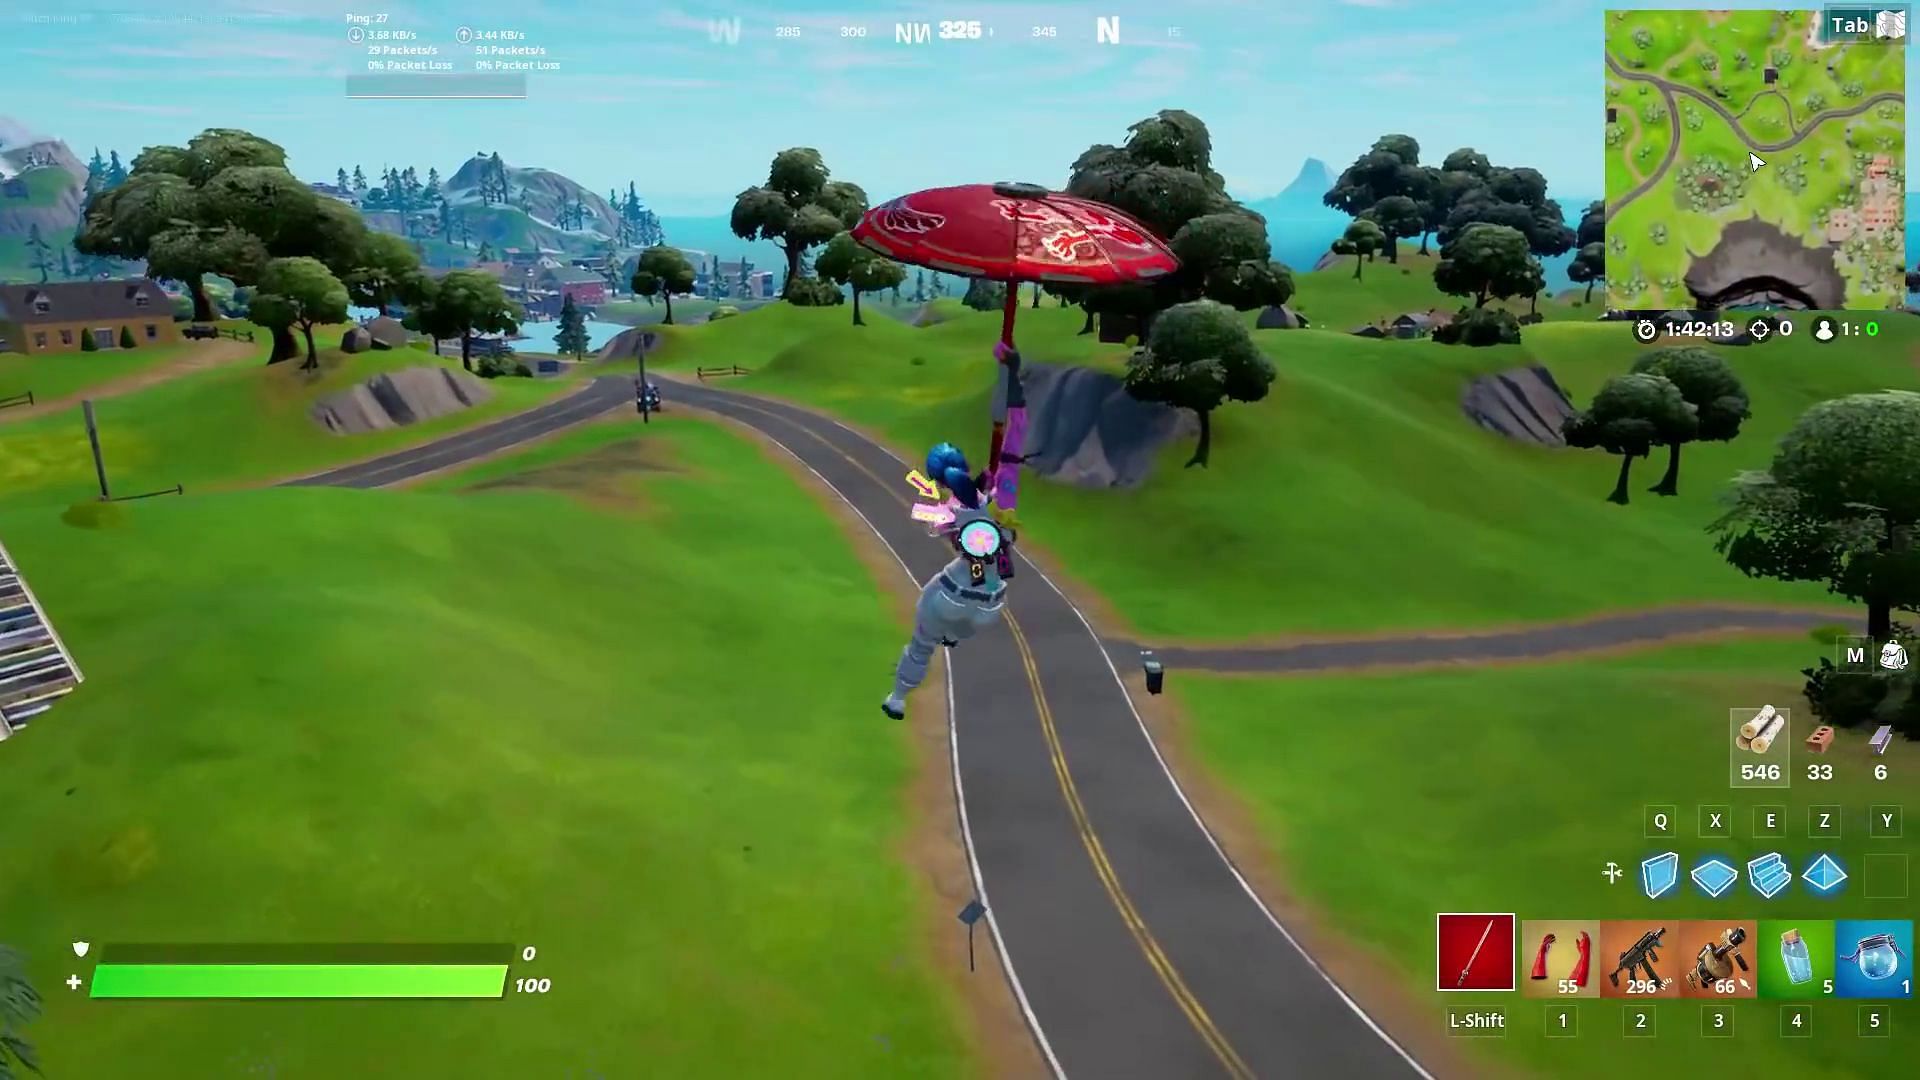 Loopers can use this glitch to redeploy the glider infinite times (Image via YouTube/GKI)